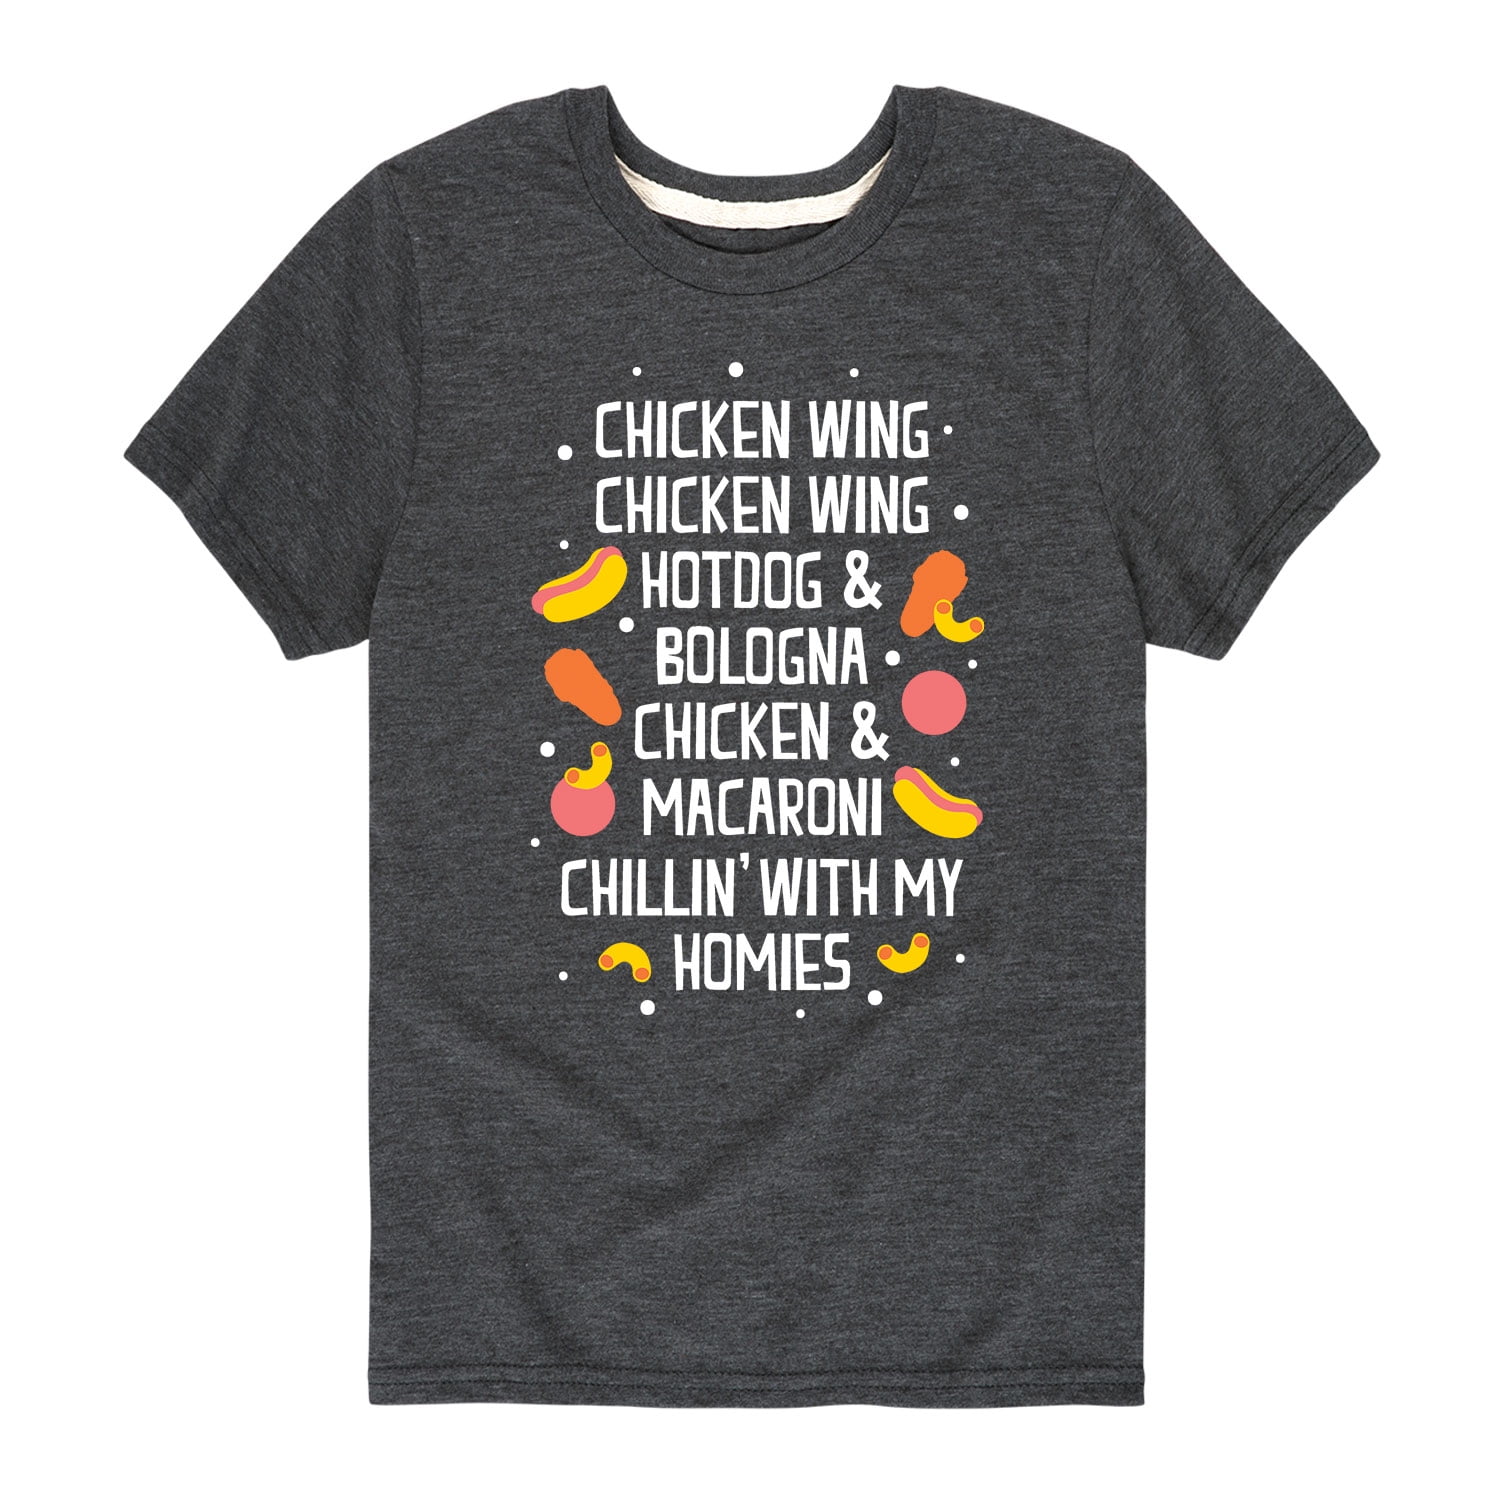 XL Got Chicken Wings Kids Tee Shirt Pick Size & Color 2T